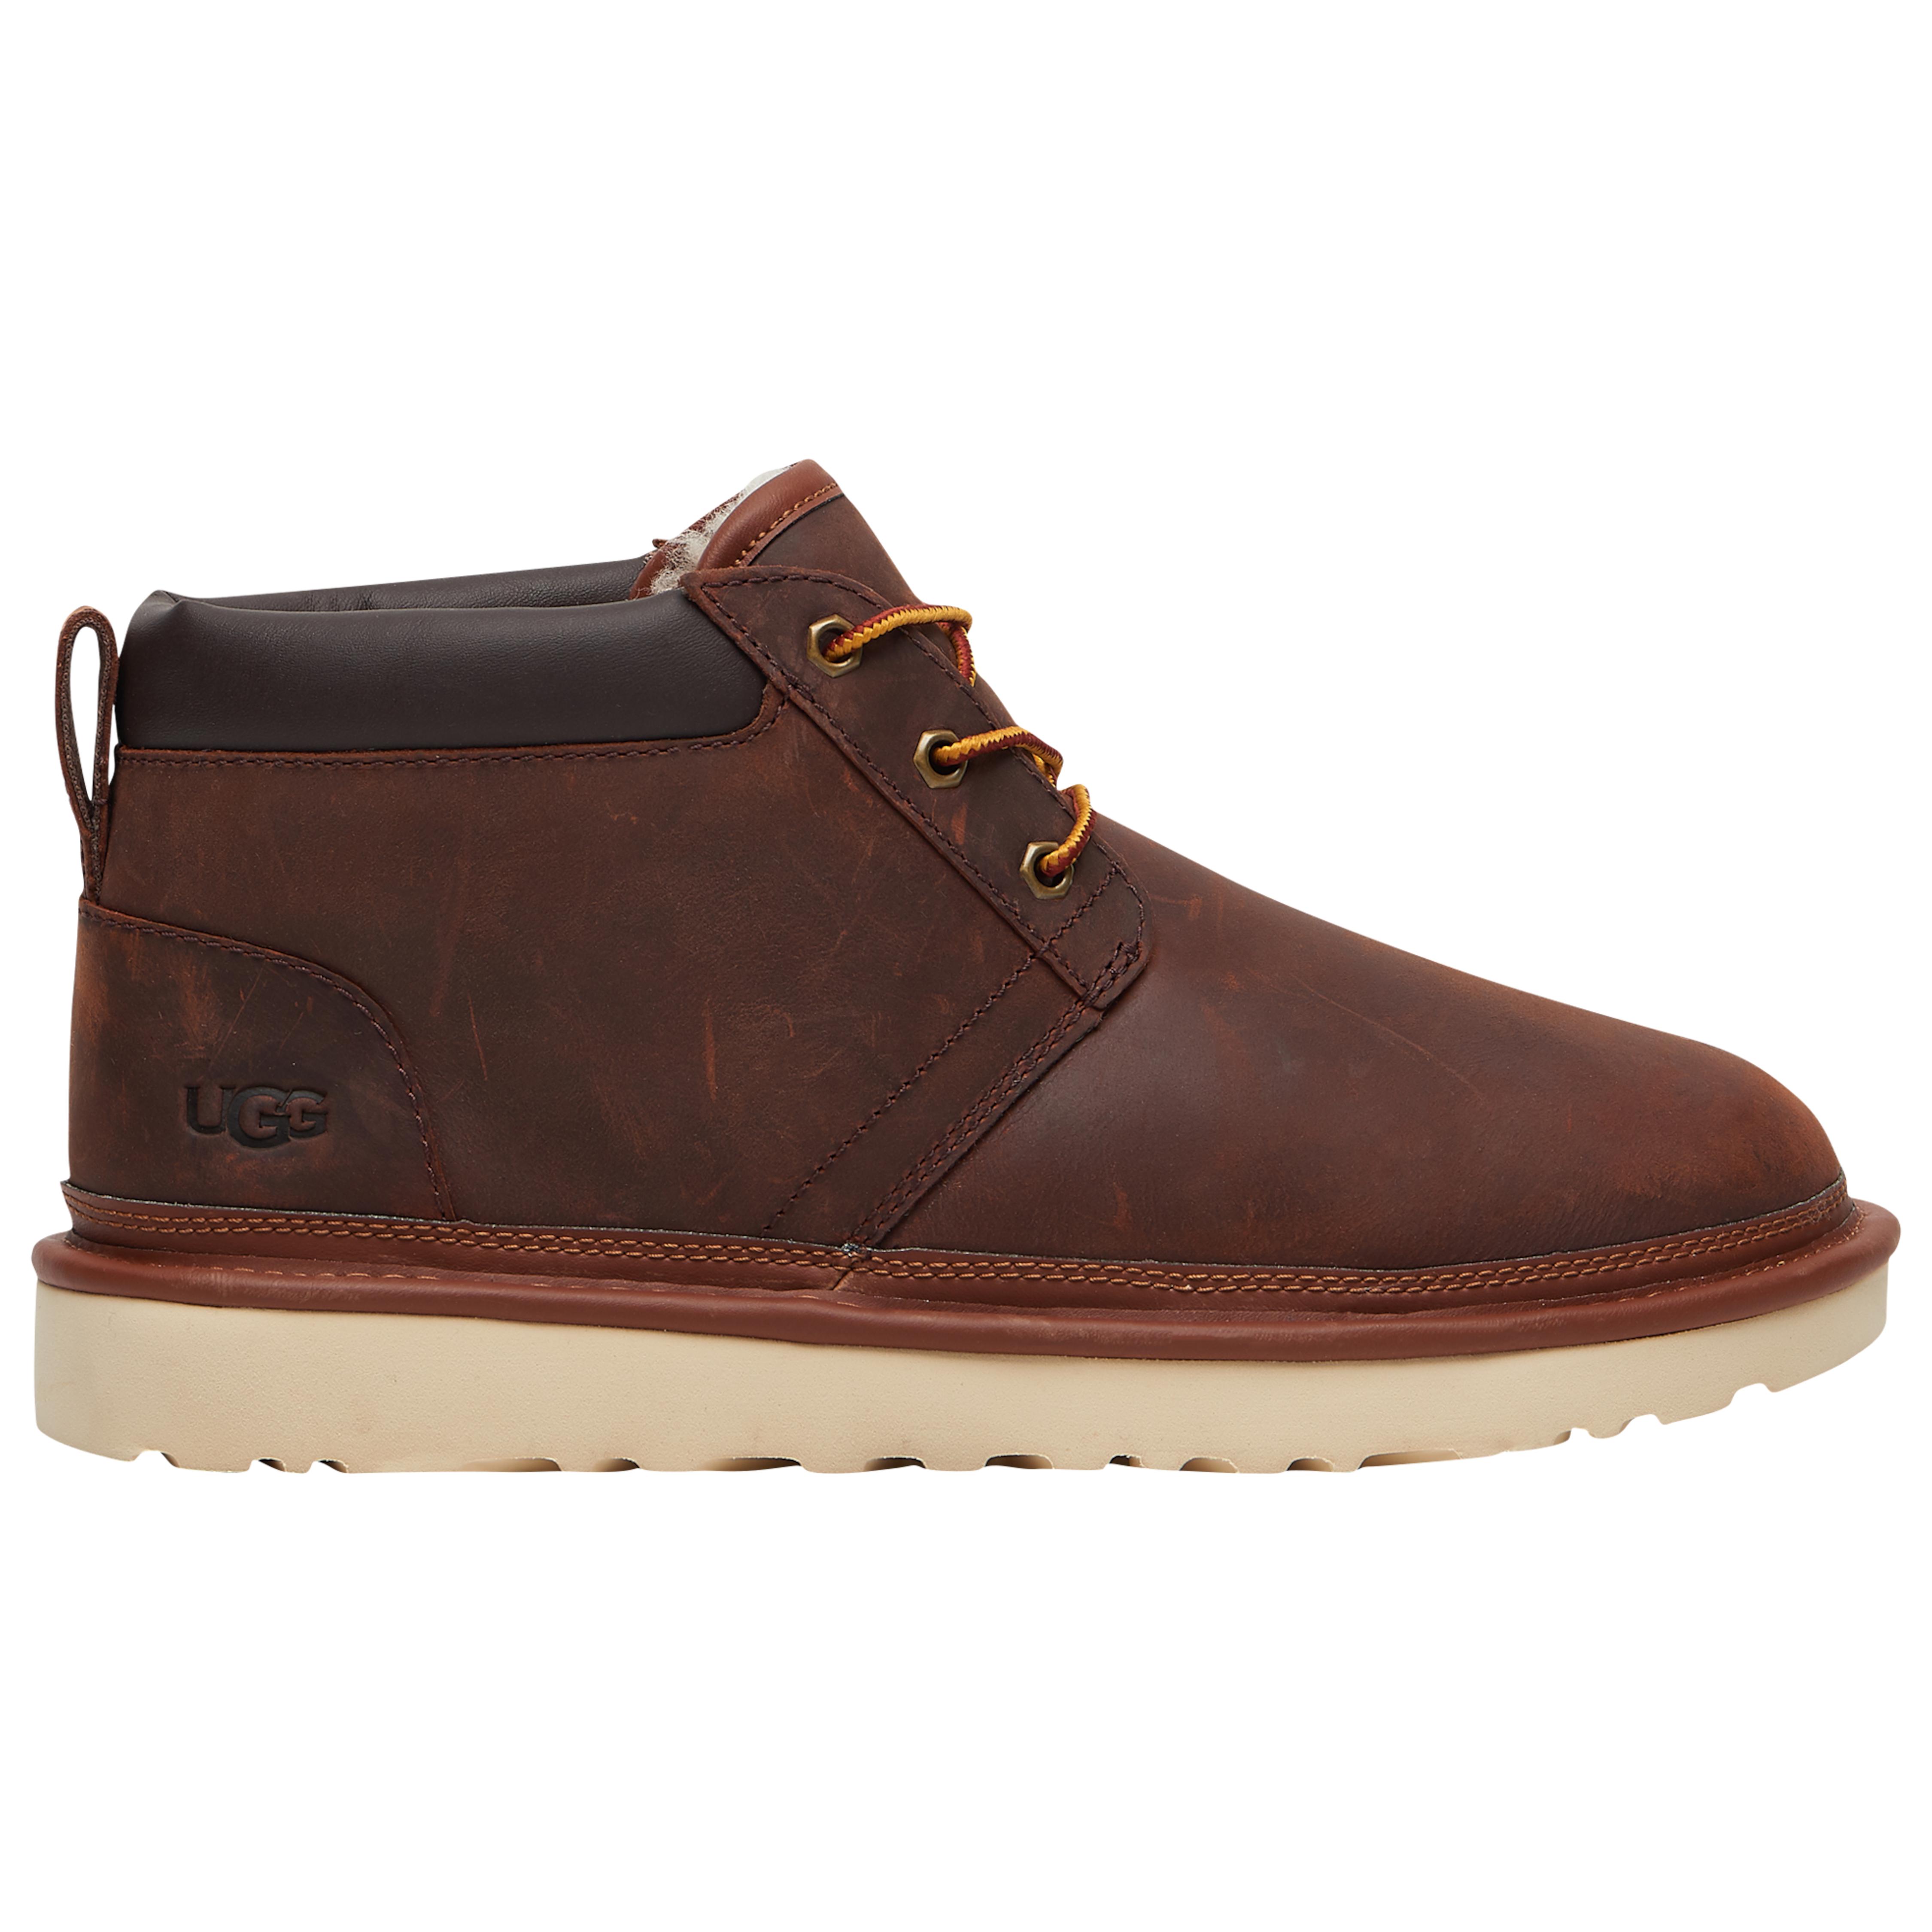 UGG Leather Neumel Utility in Brown for Men - Lyst